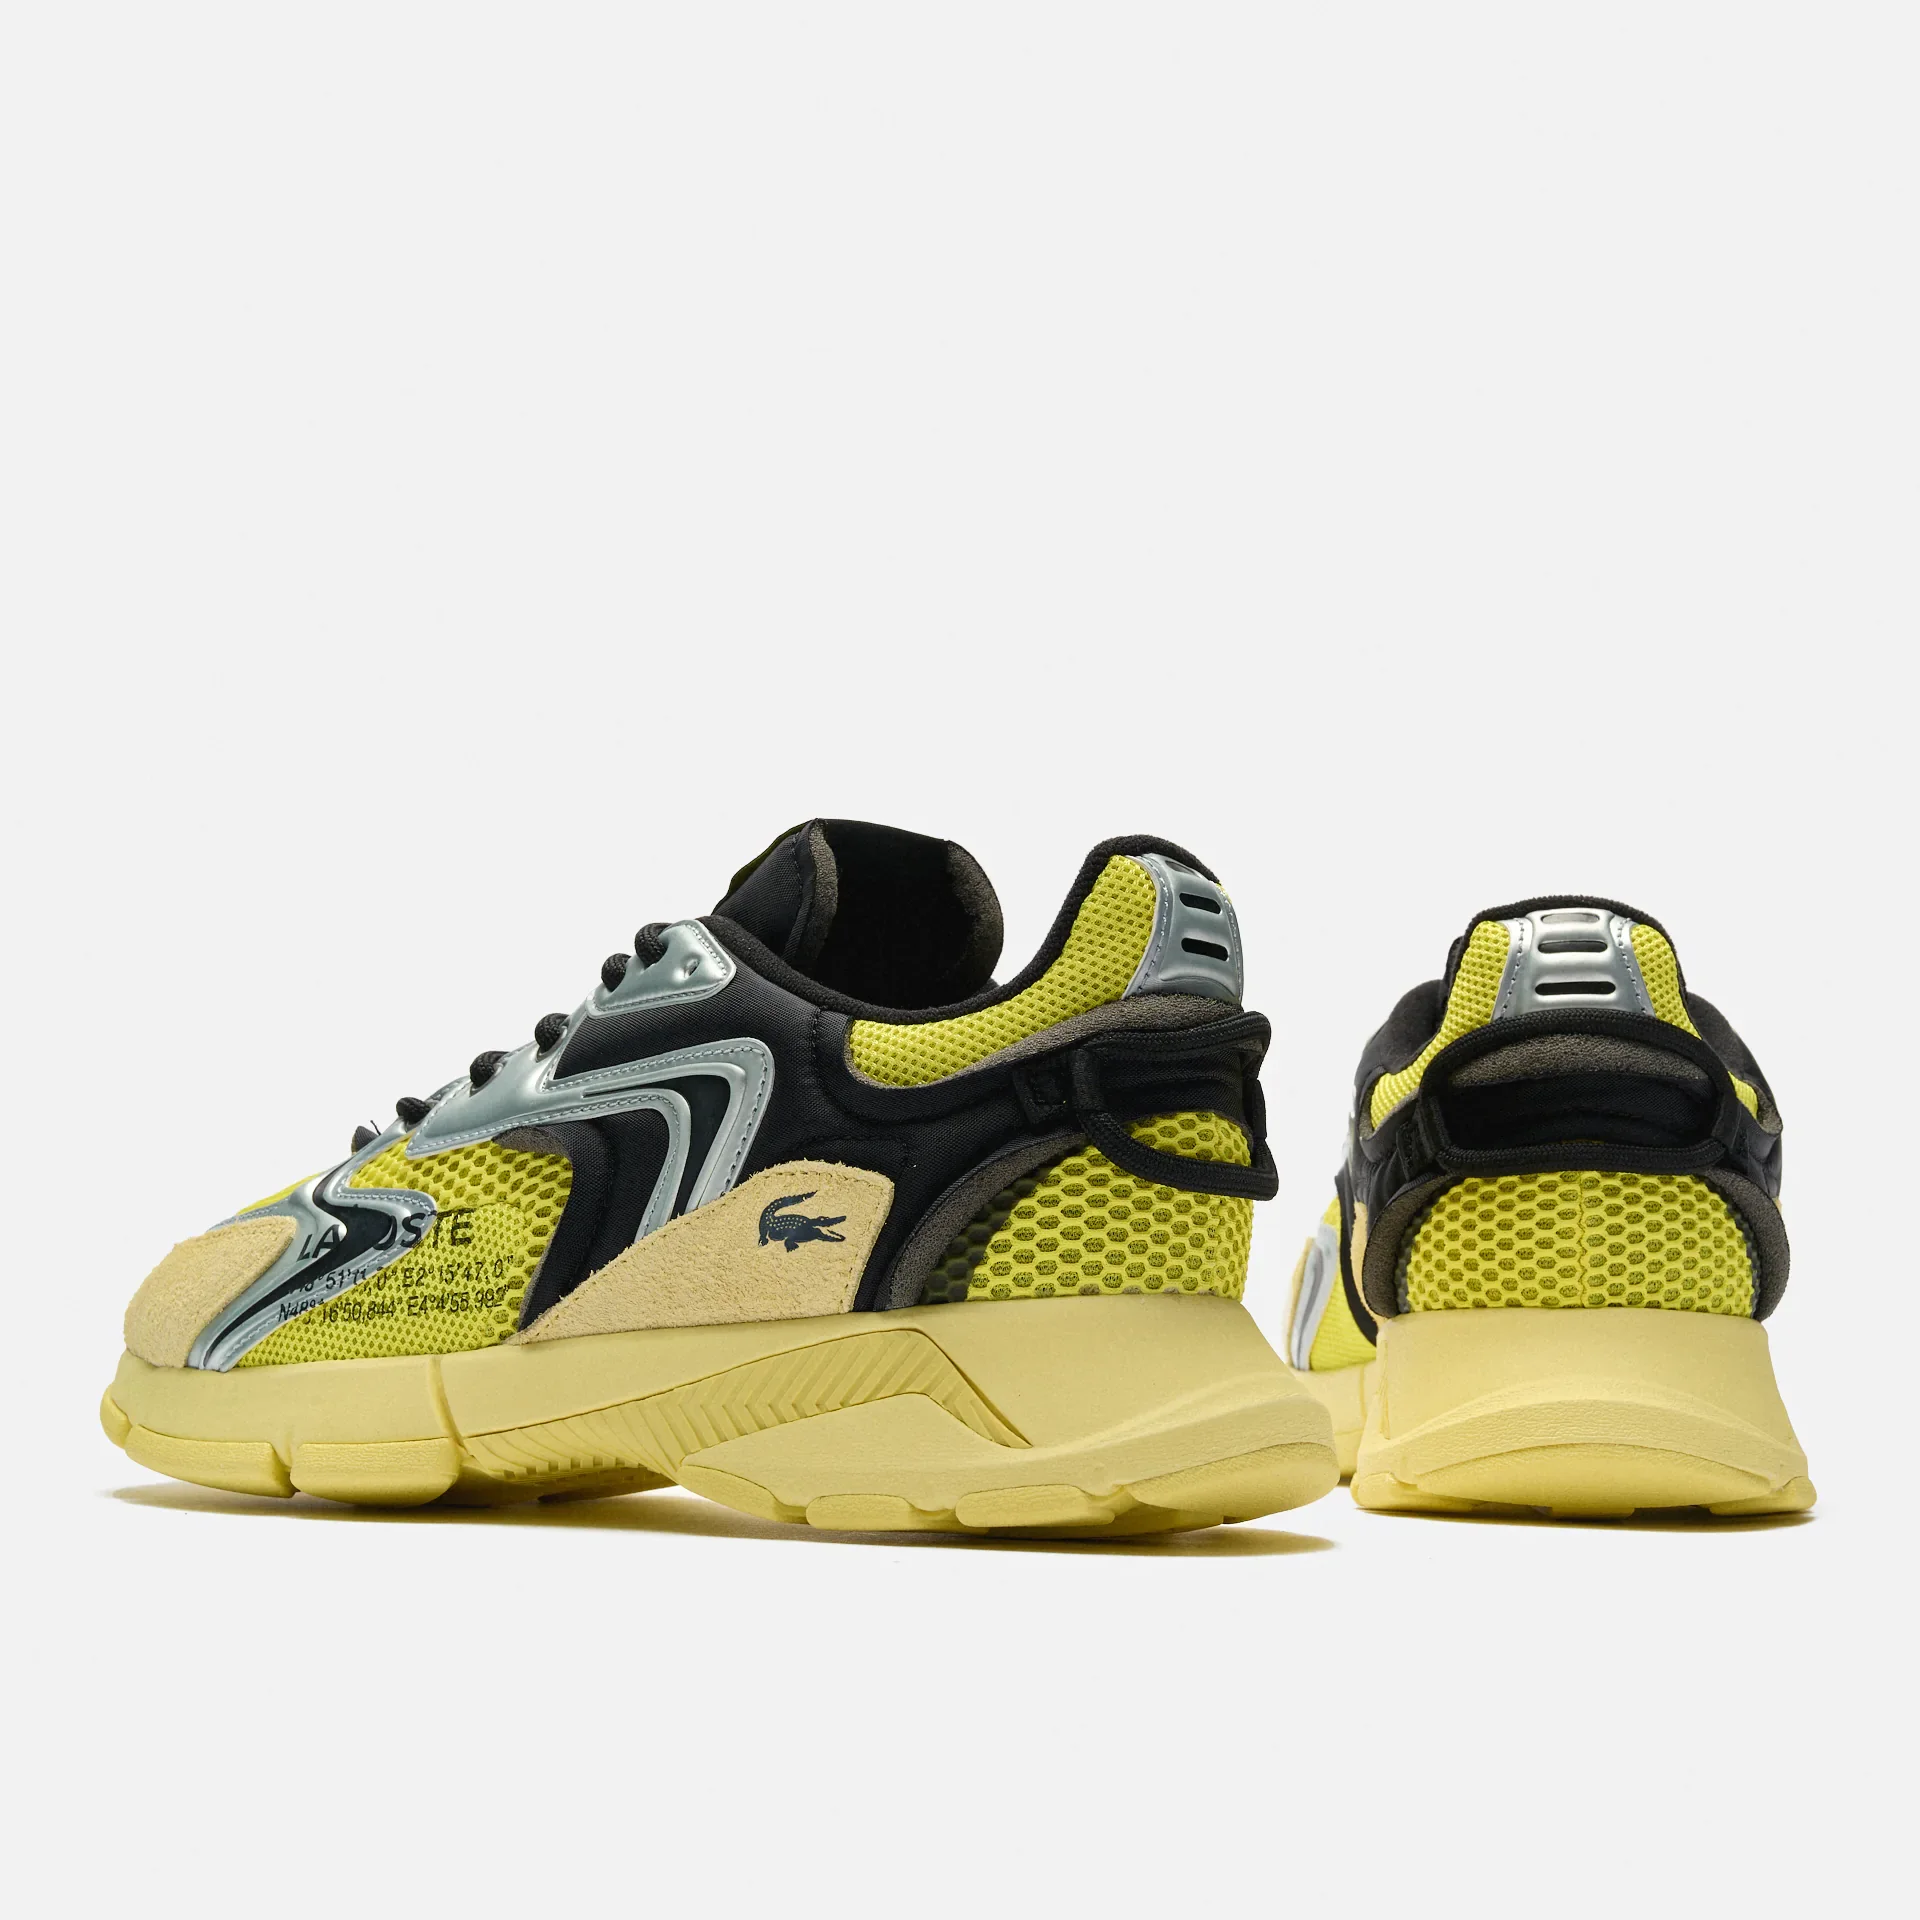 Lacoste L003 Neo Contrasted Textile Sneaker Yellow/Black